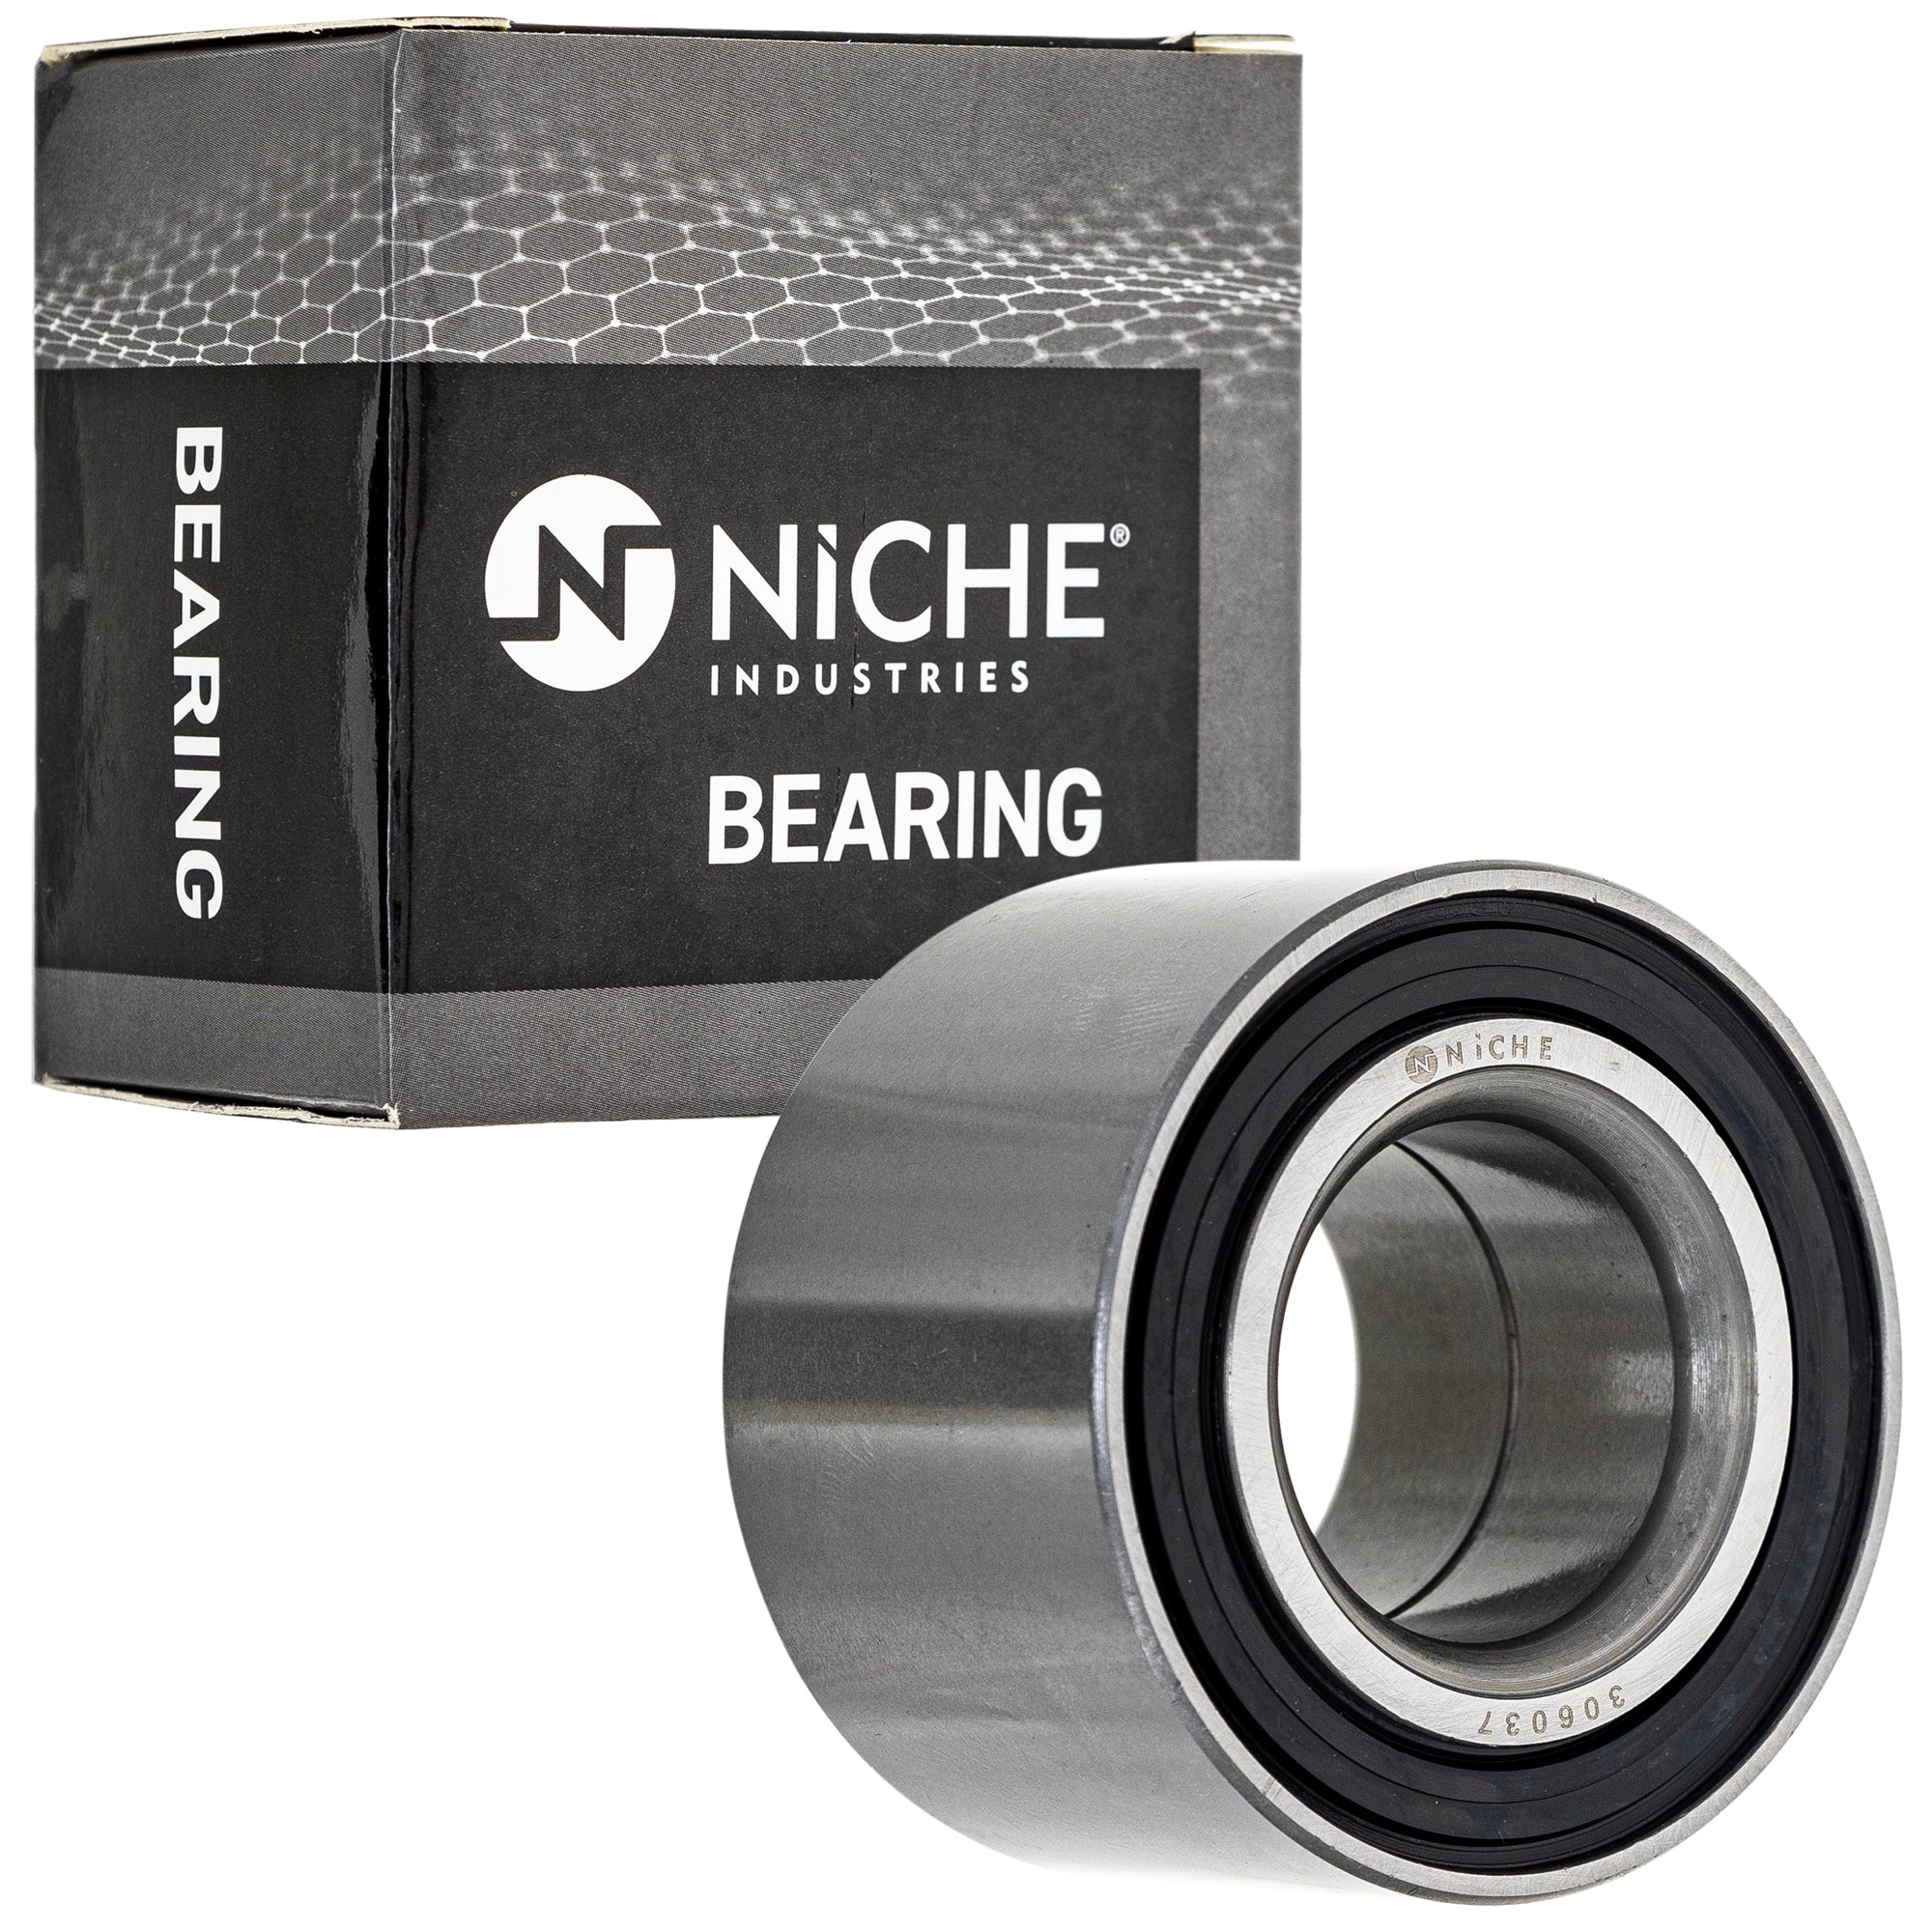 NICHE 519-CBB2261R Bearing 2-Pack for zOTHER BRP Can-Am Ski-Doo